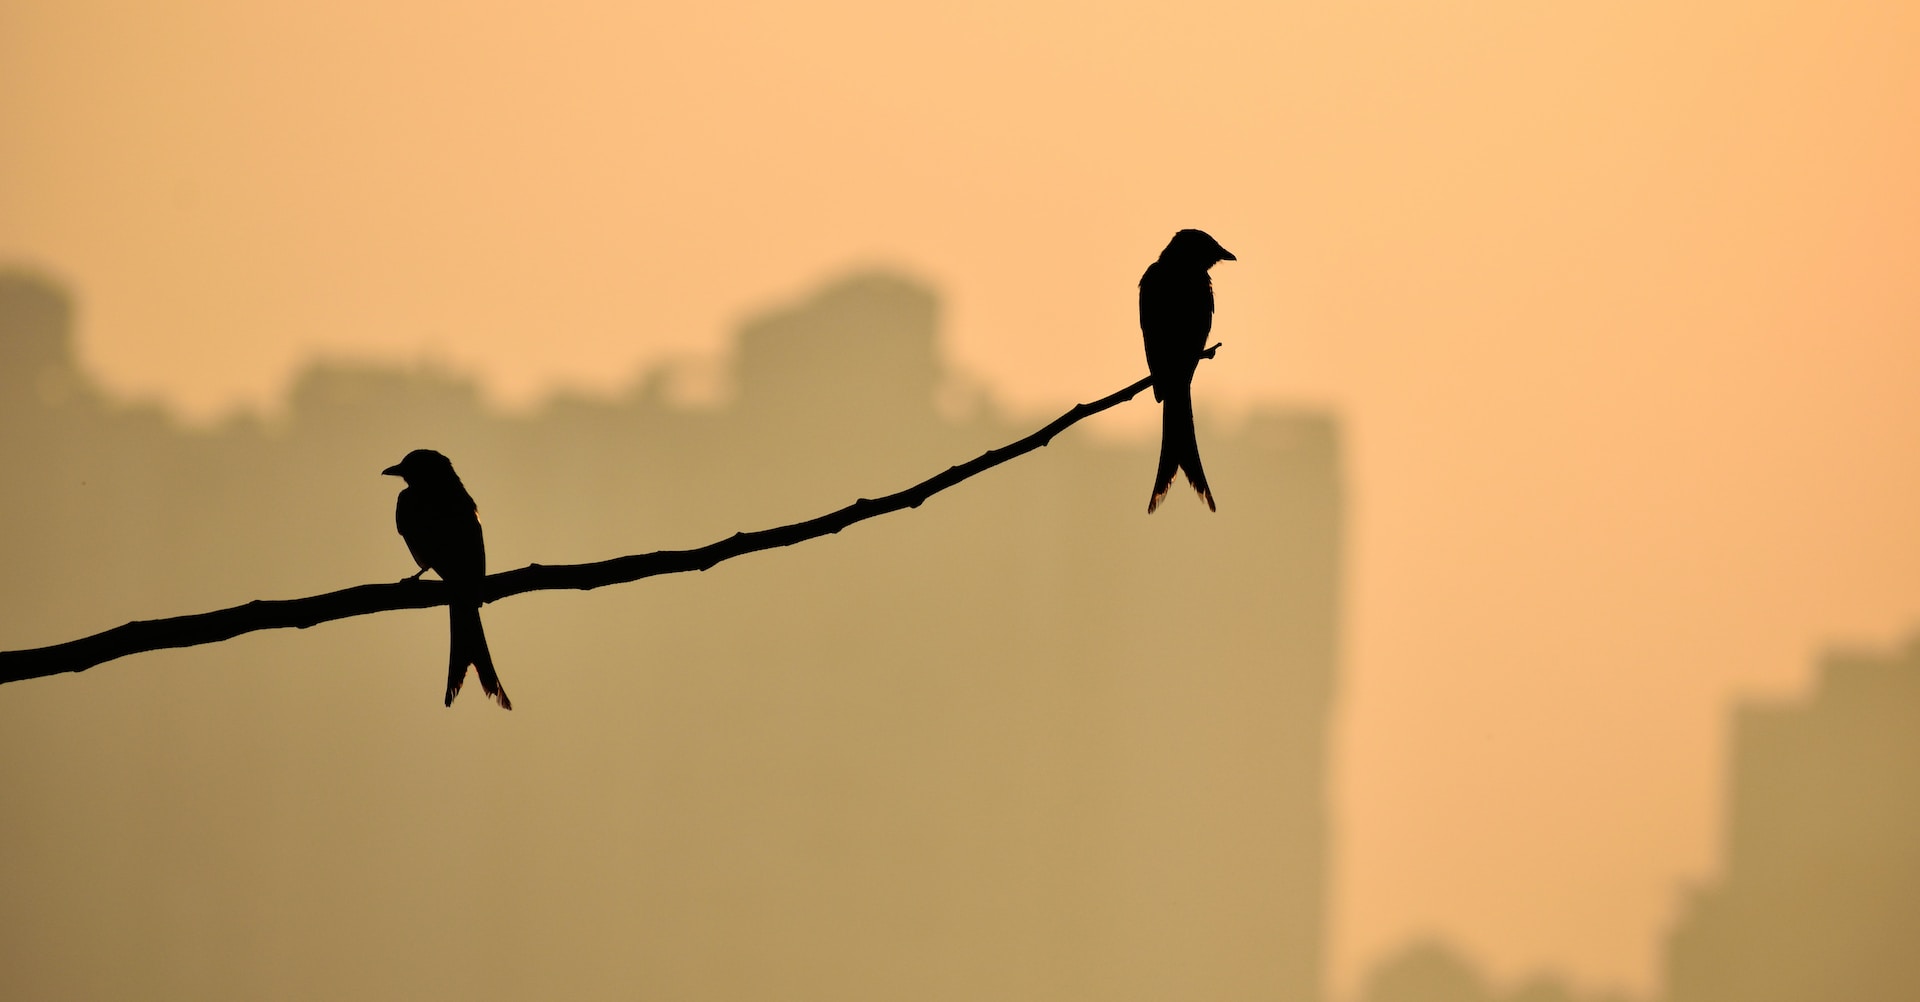 50 High Quality Examples Of Silhouette Photography